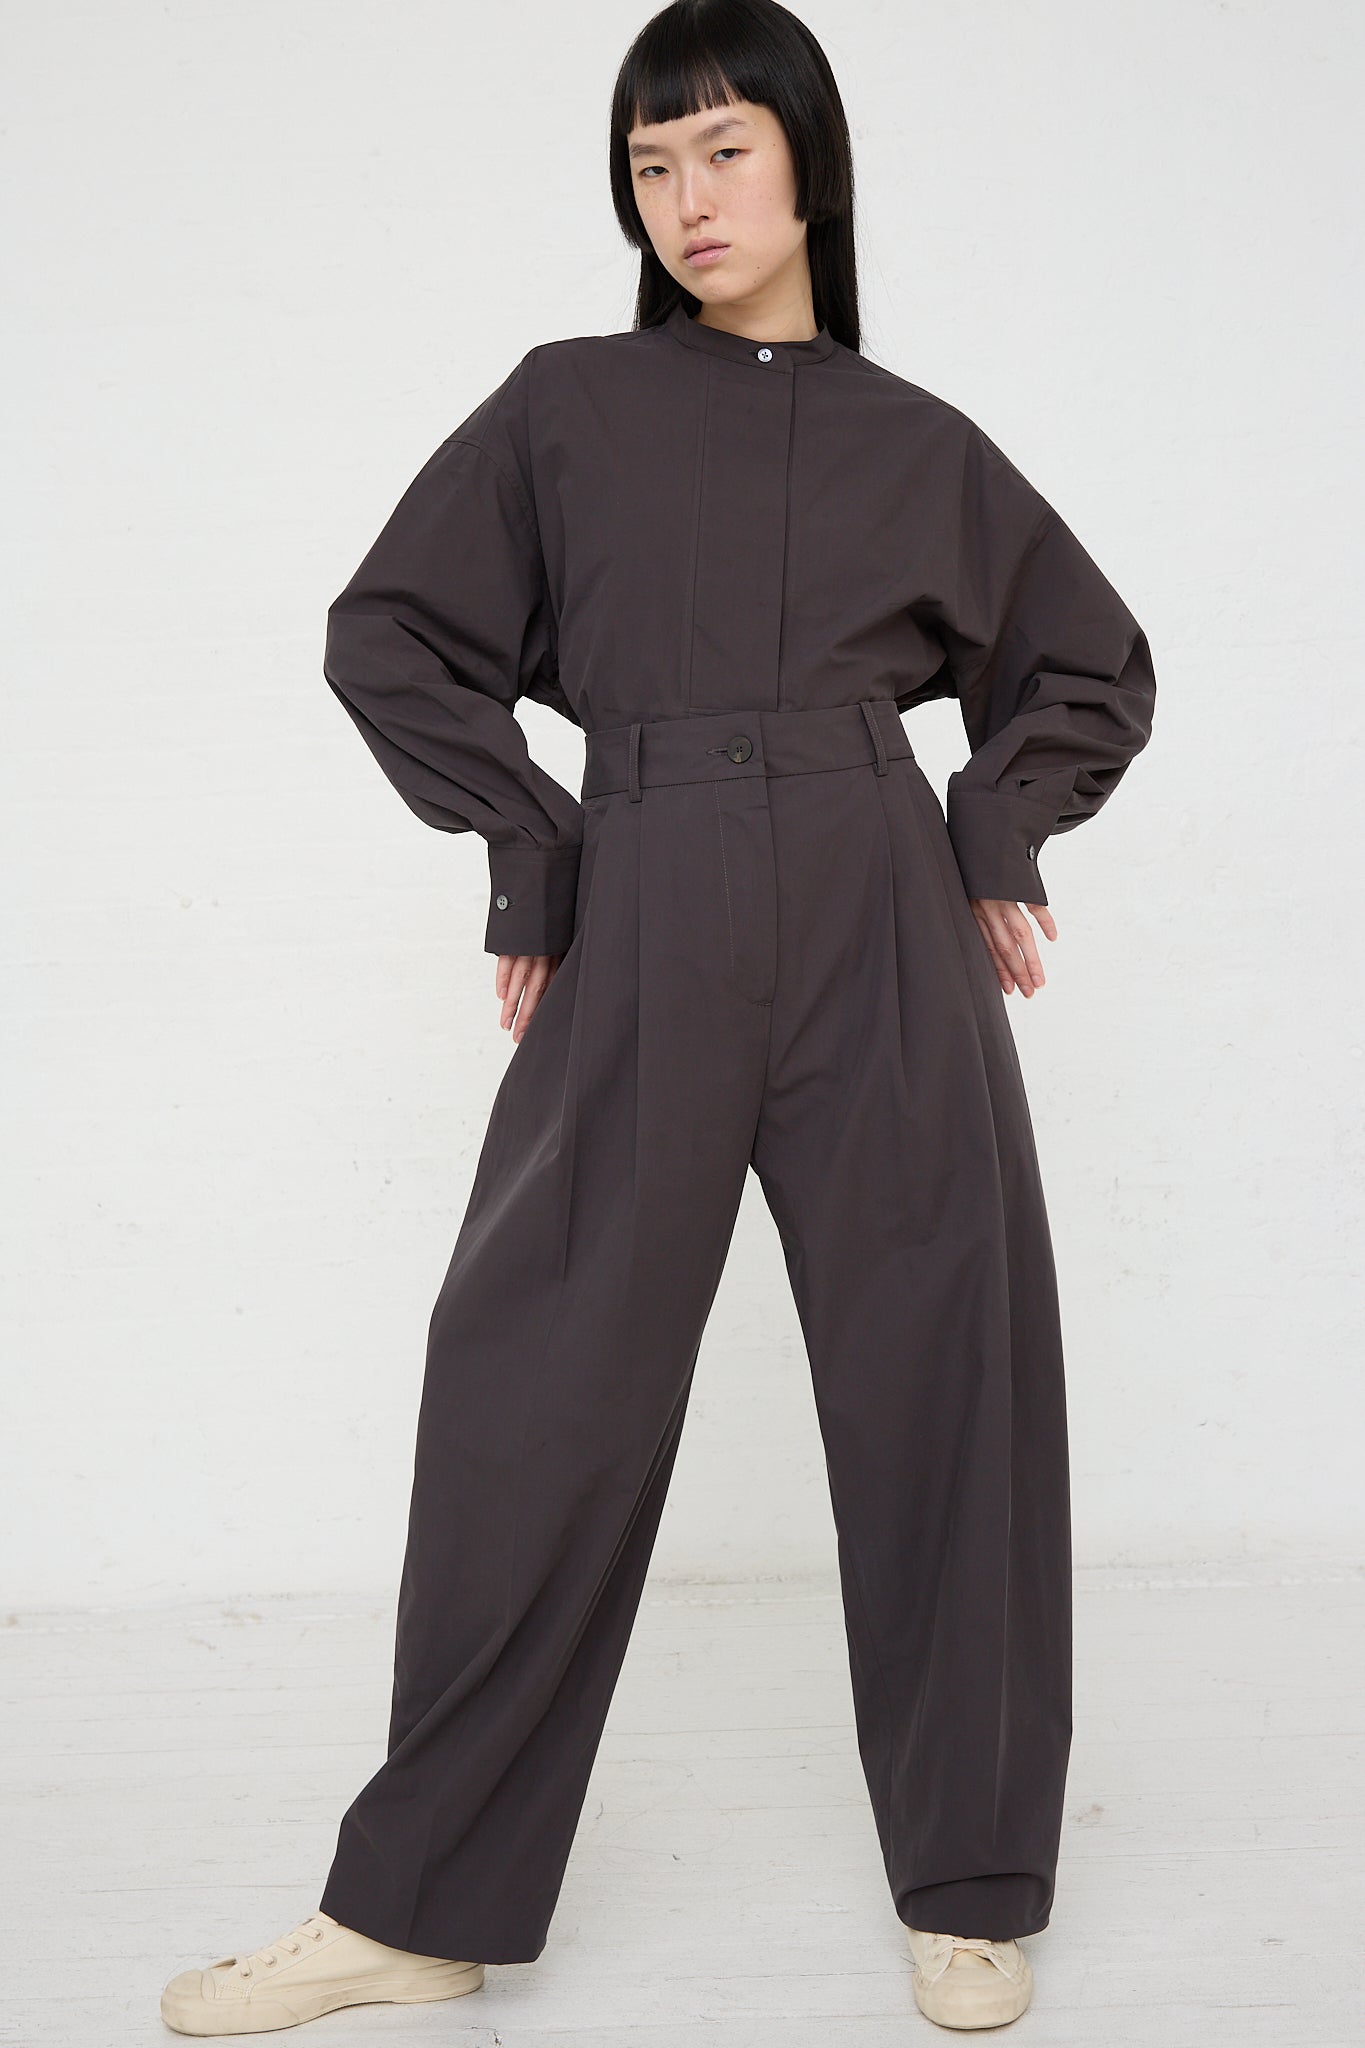 The model is wearing an Acuna Double Pleat Front Trouser in Asphalt by Studio Nicholson. Front view and full length.